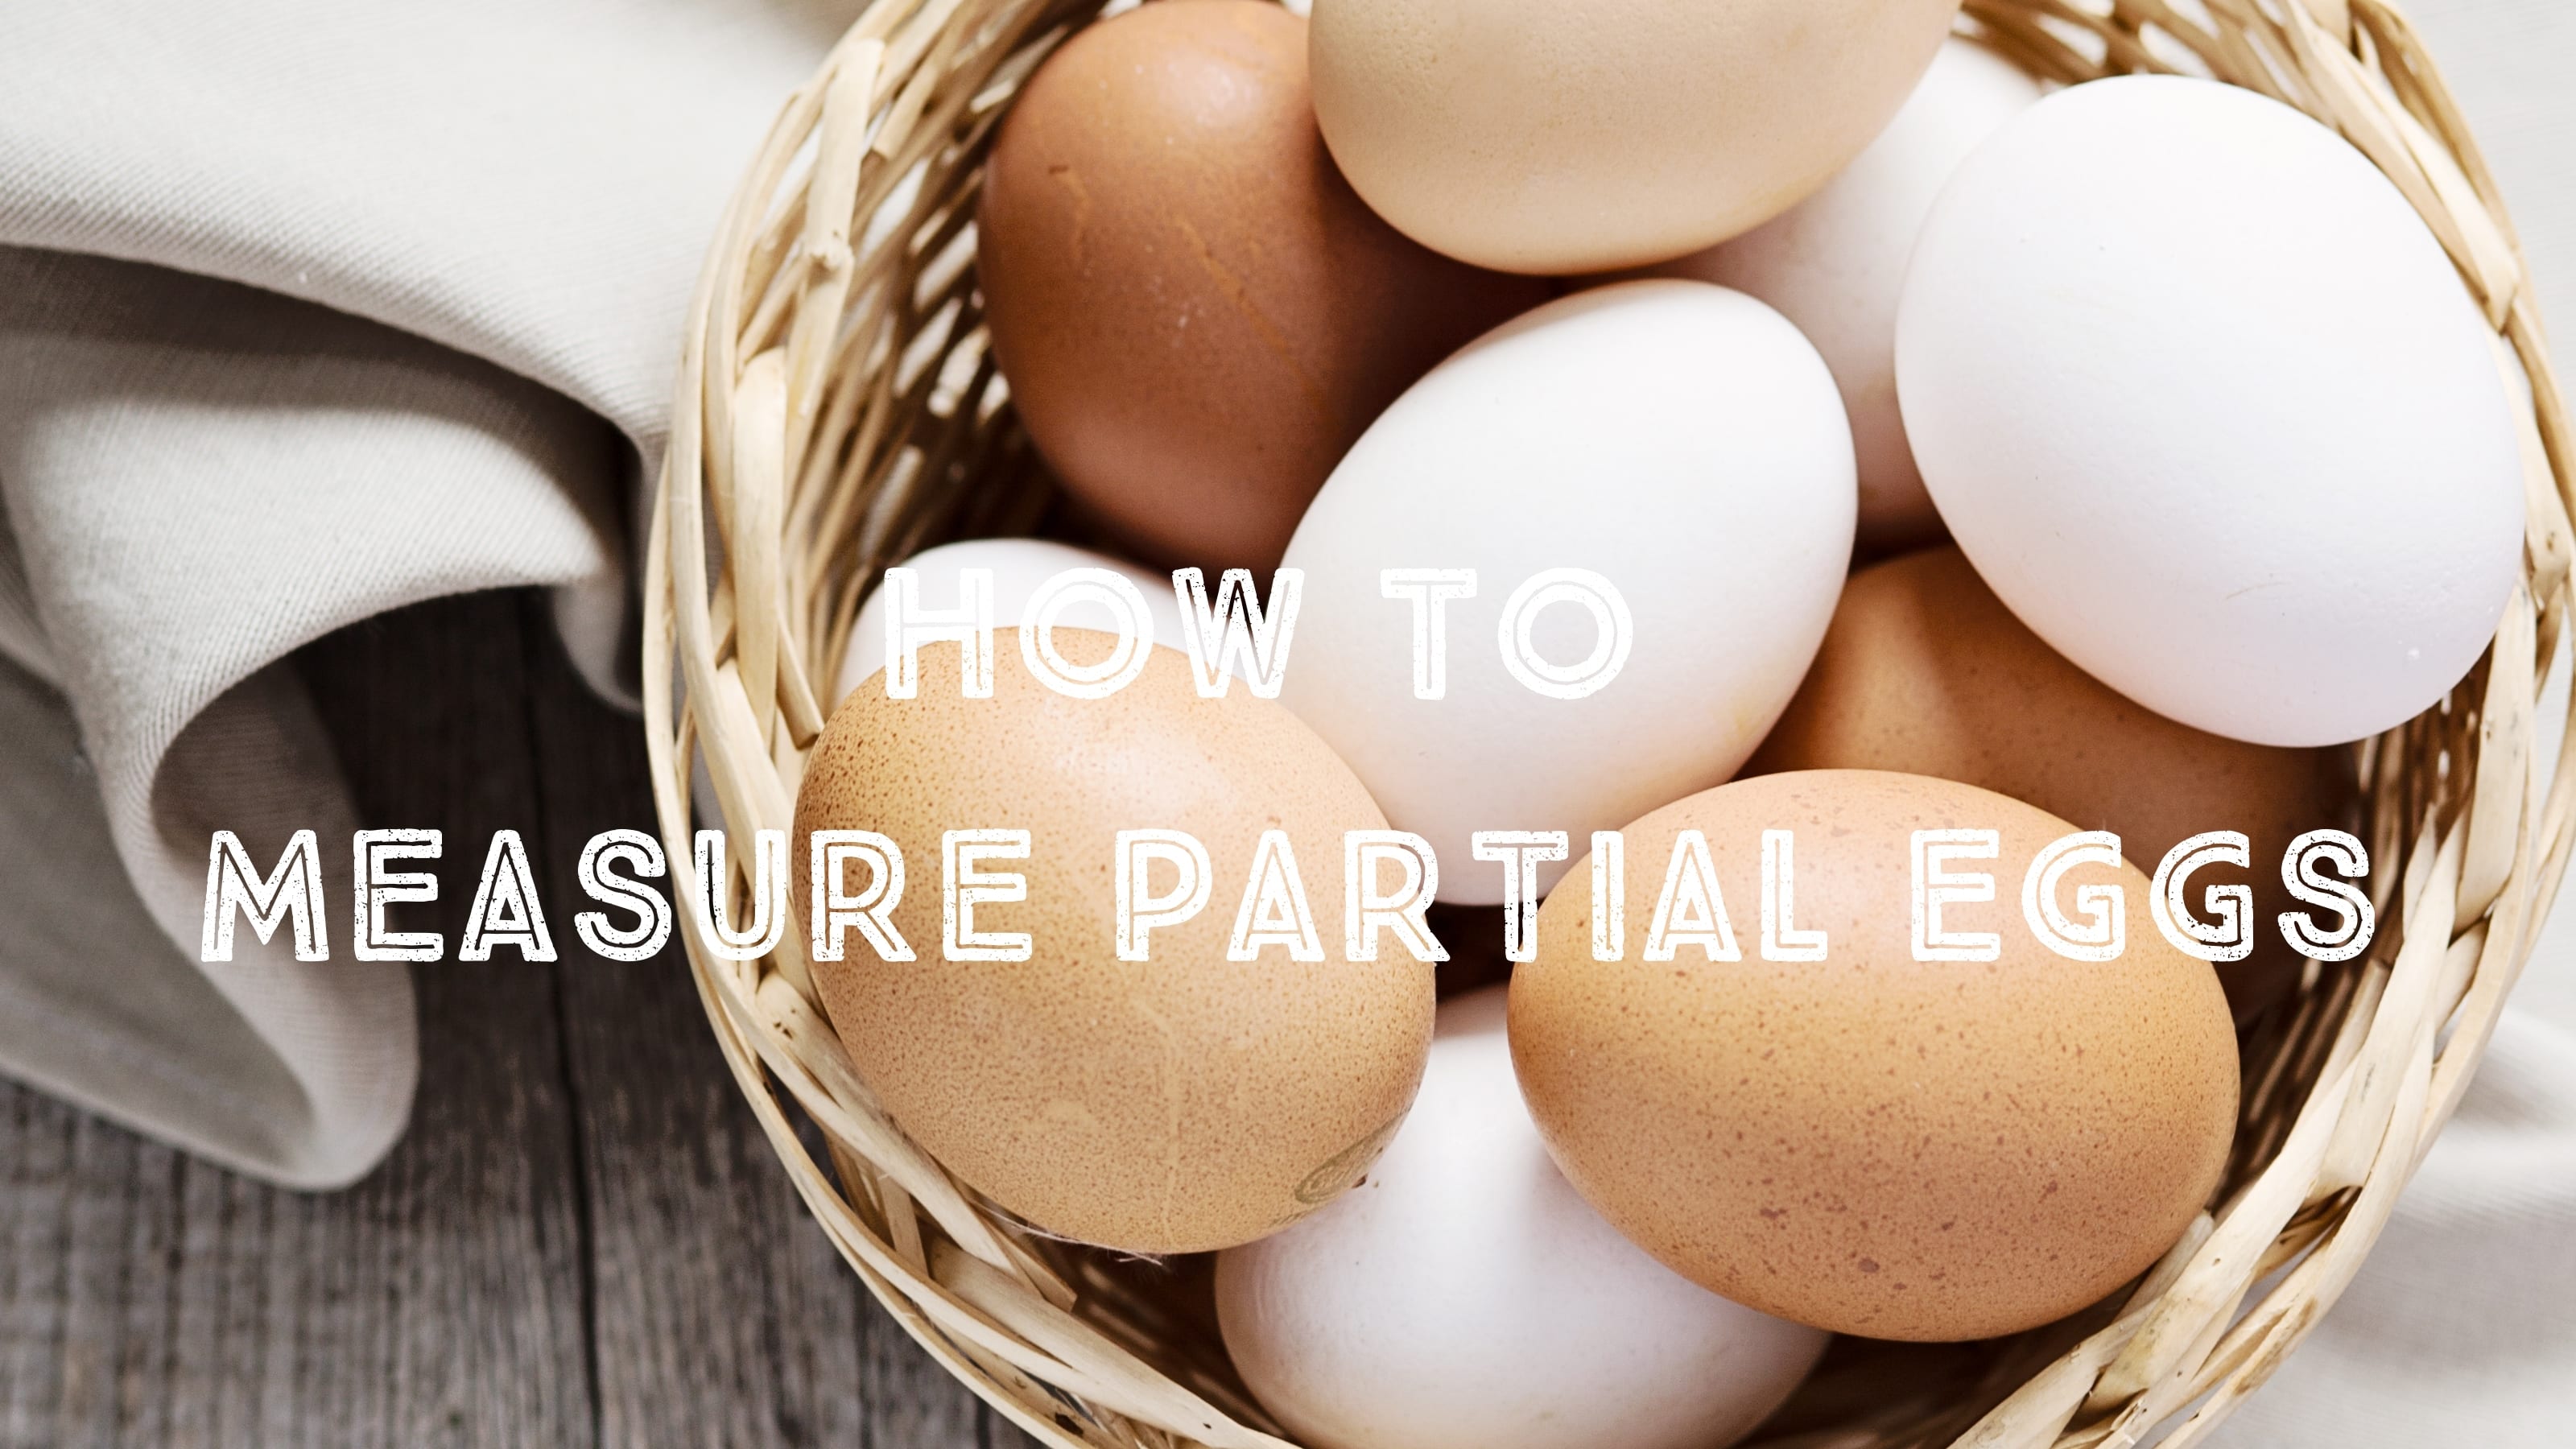 How to Measure Partial Eggs (2 ways!)